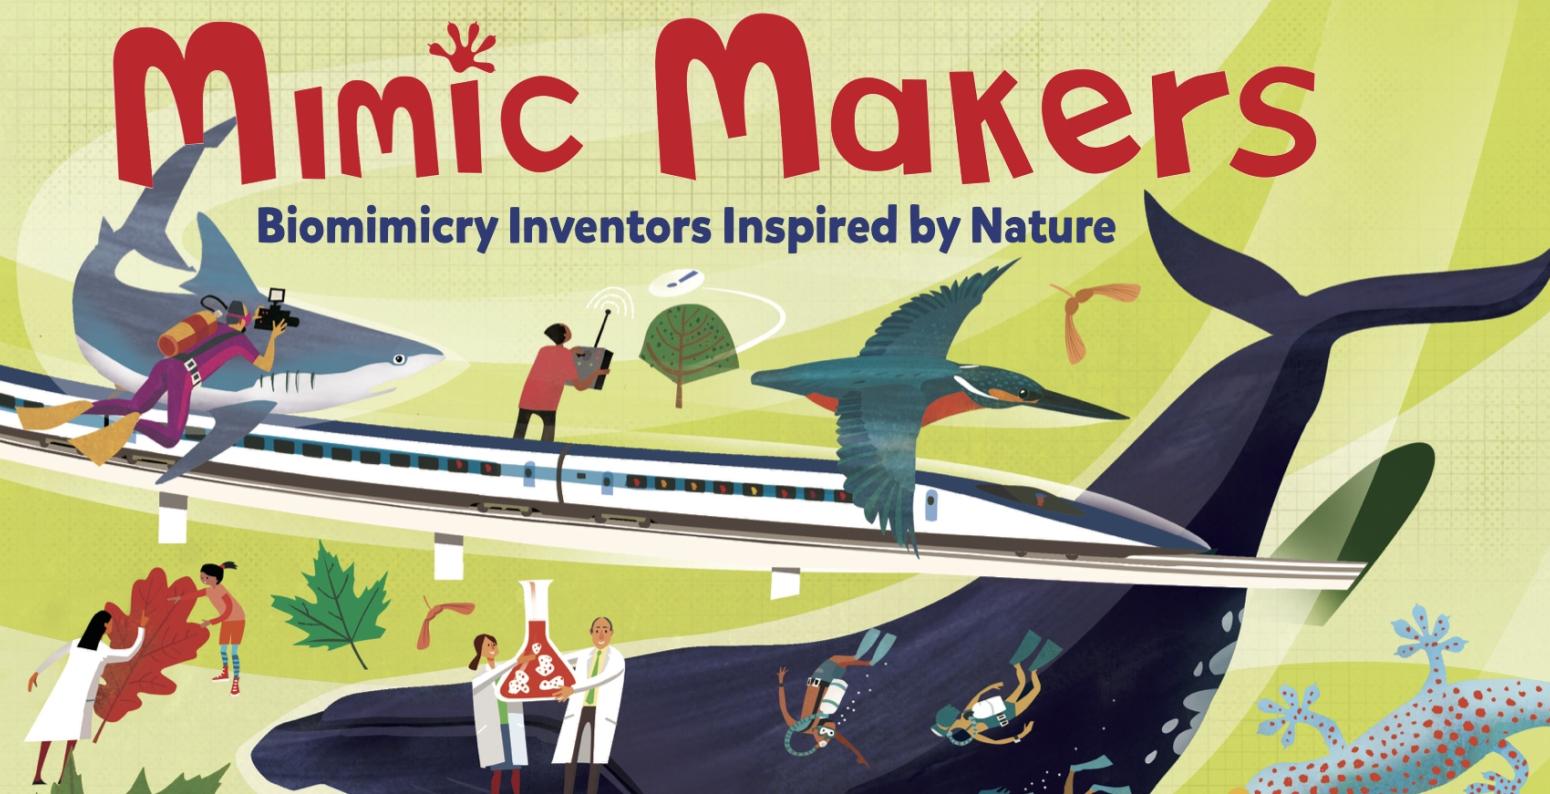 Cover of the picture book, Mimic Makers, showing scientists looking at different things, including leaves, a whale, and a speed train.